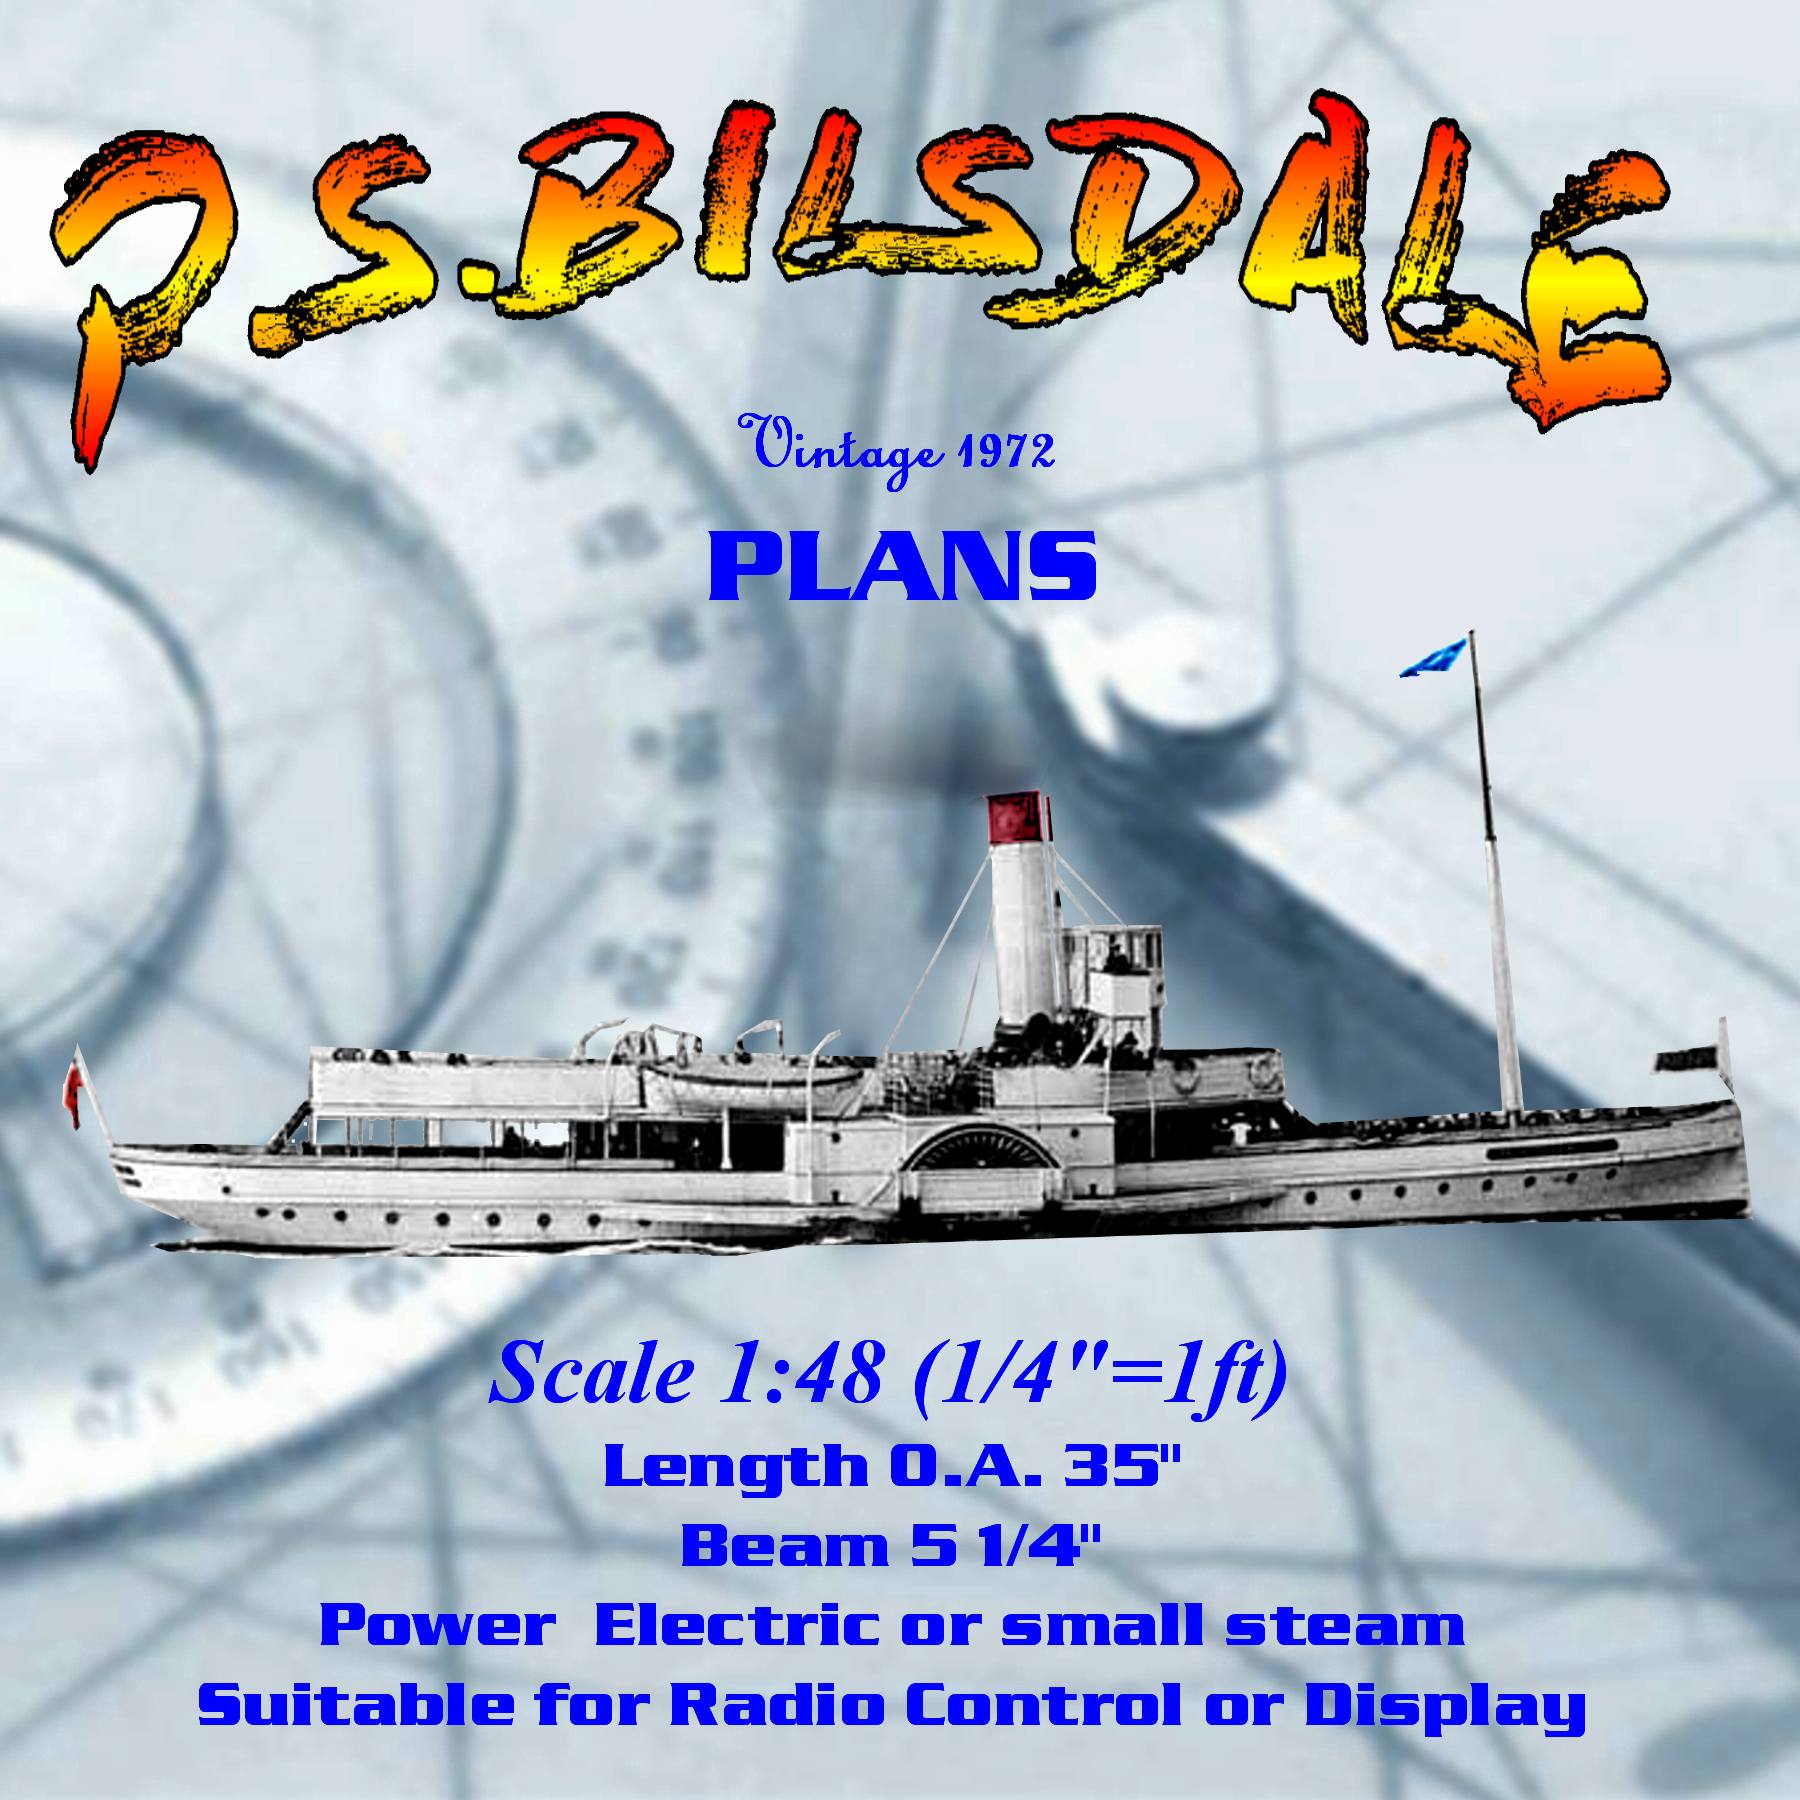 full size printed plans scale 1:48  'tug-steamer' p.s.bilsdale for radio control